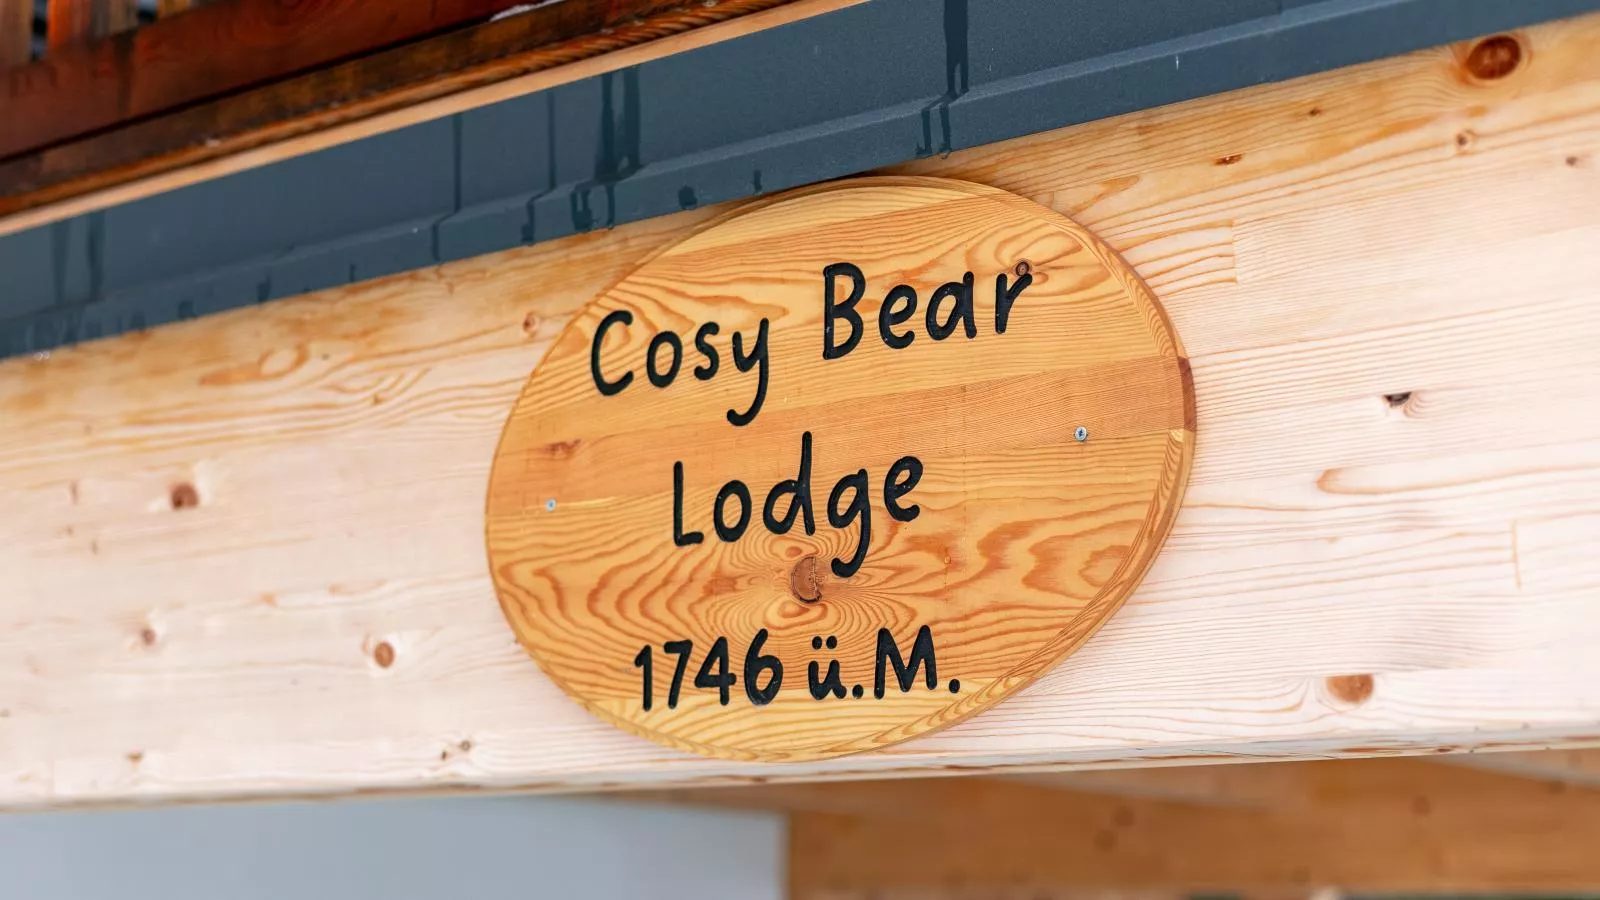 The Cosy Bear Lodge-Exterieur winter